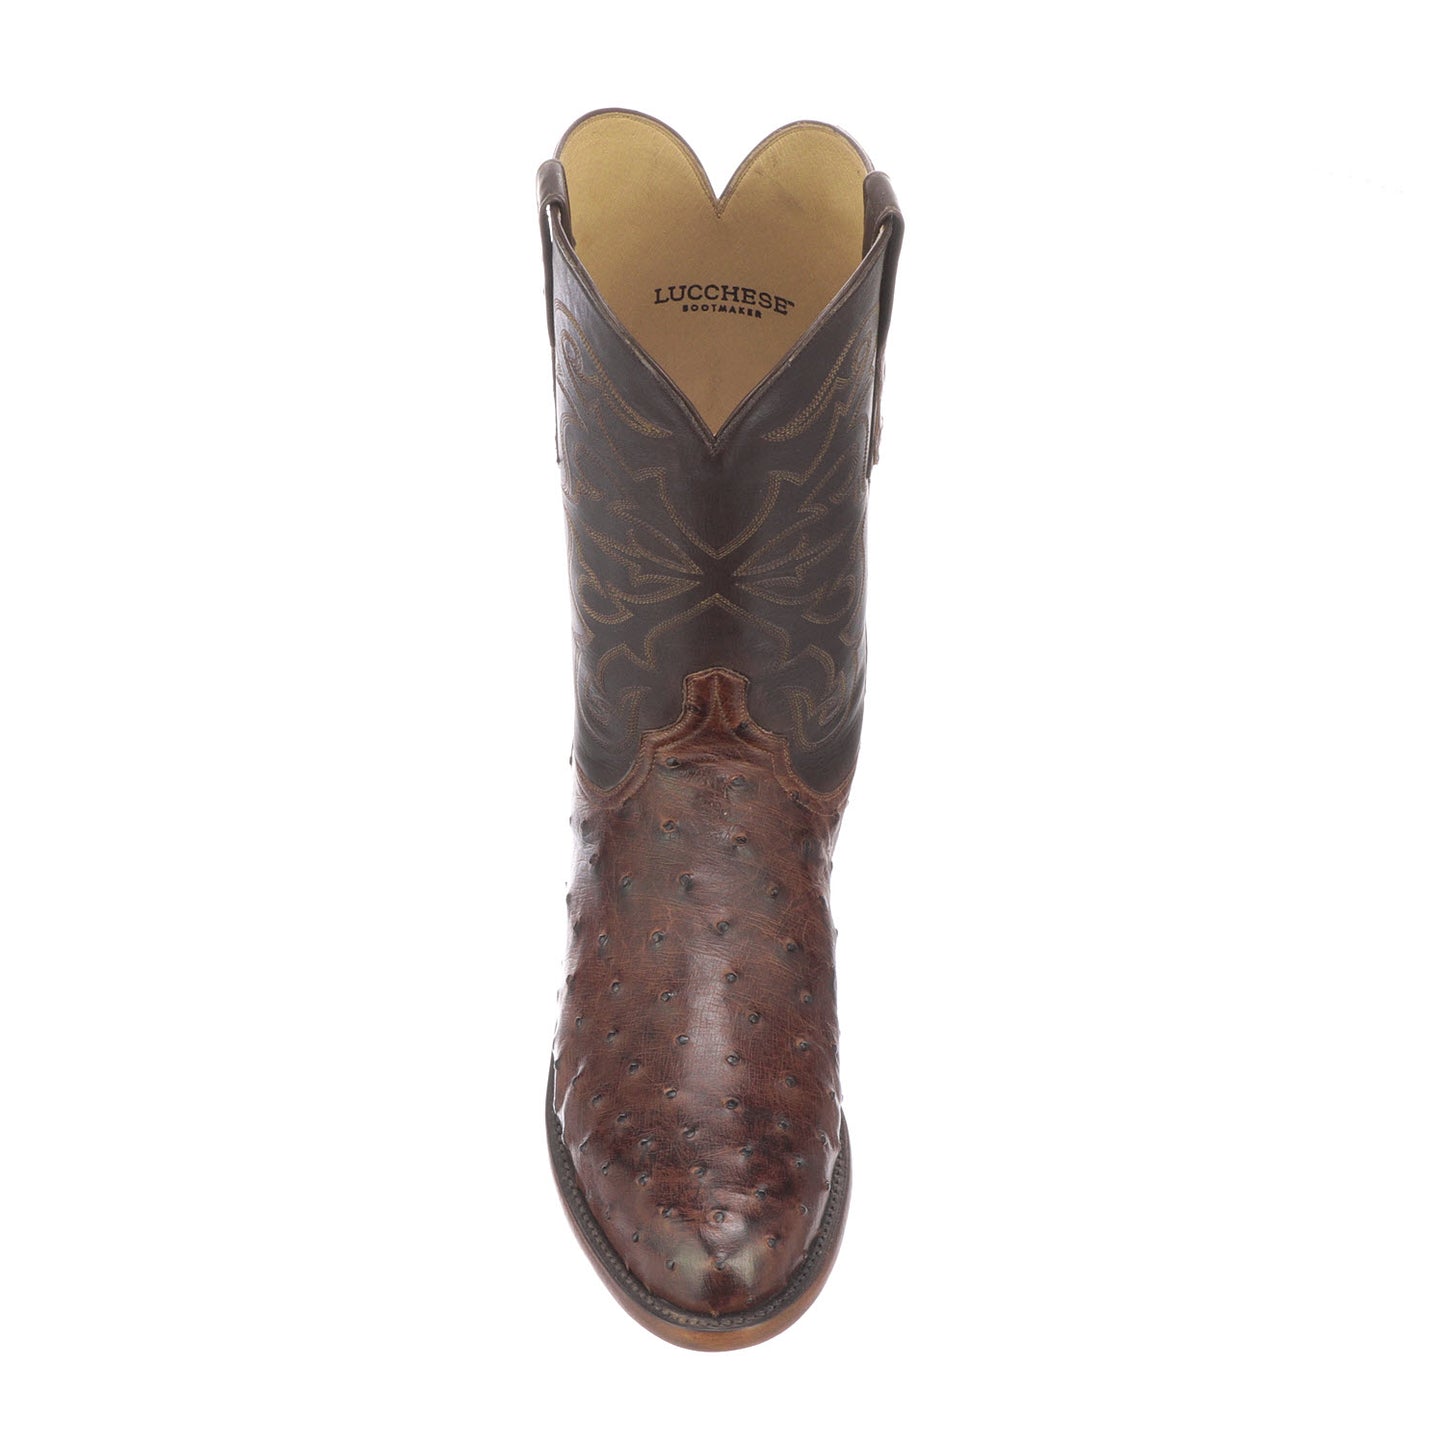 Lucchese Men's Hudson Boot - Chocolate